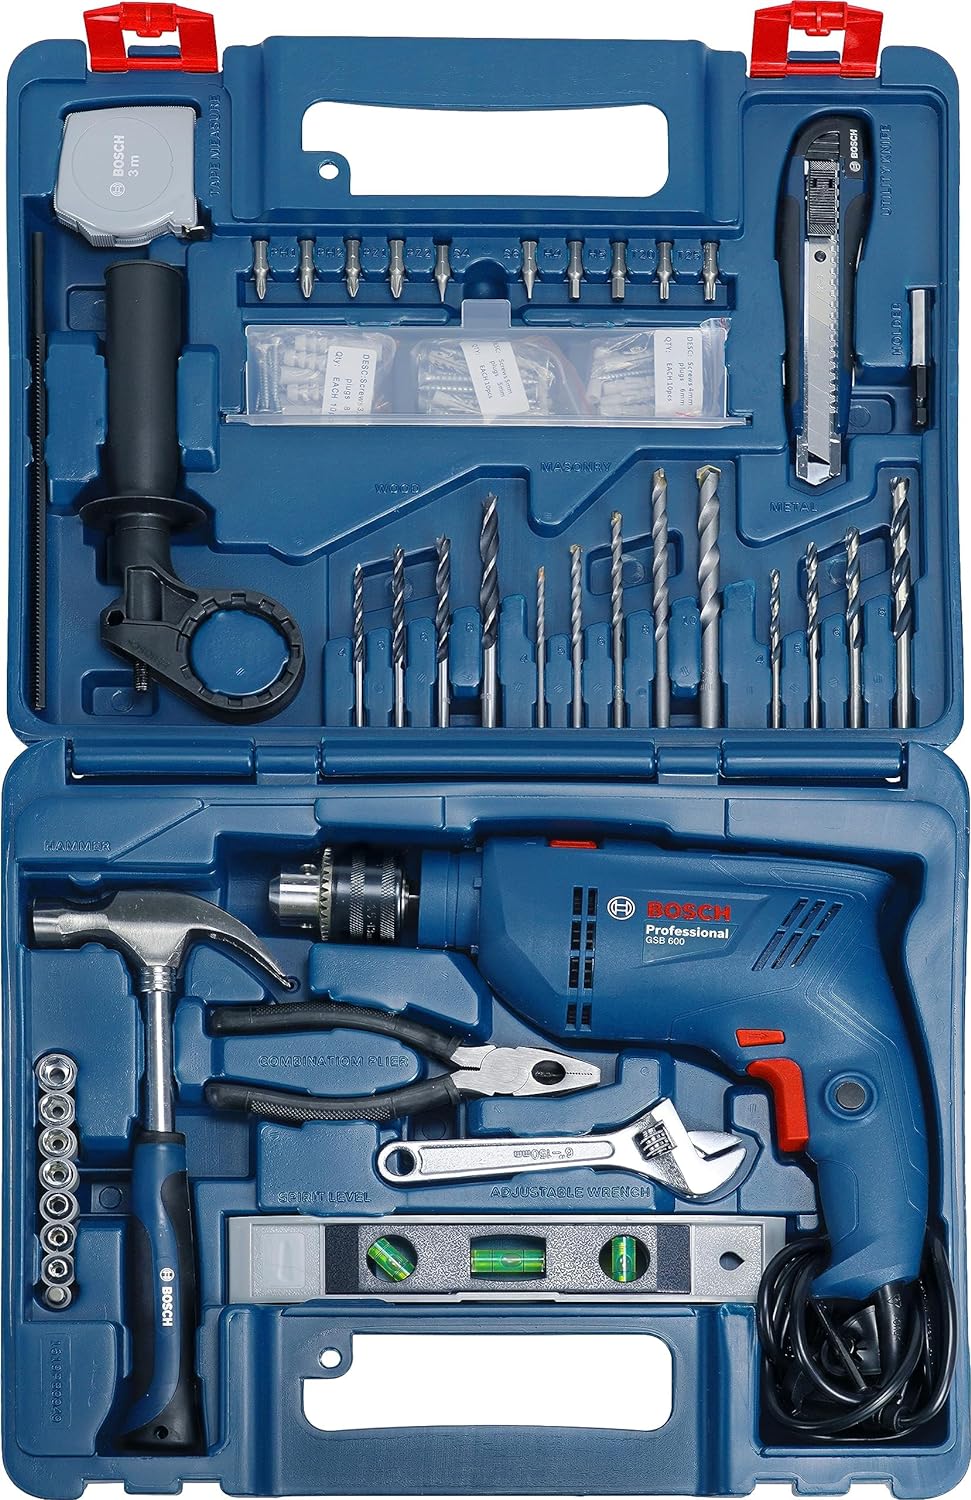 Bosch GSB 600 Corded Electric Impact Drill Kit, 600 W, 13 mm, 1.7 Kg, 3000 RPM, 1.4 Nm, Variable Speed, Forward/Reverse Rotation, Double Insulation, Improved Carbon Brush (100 Pc Kit) | Multicolor